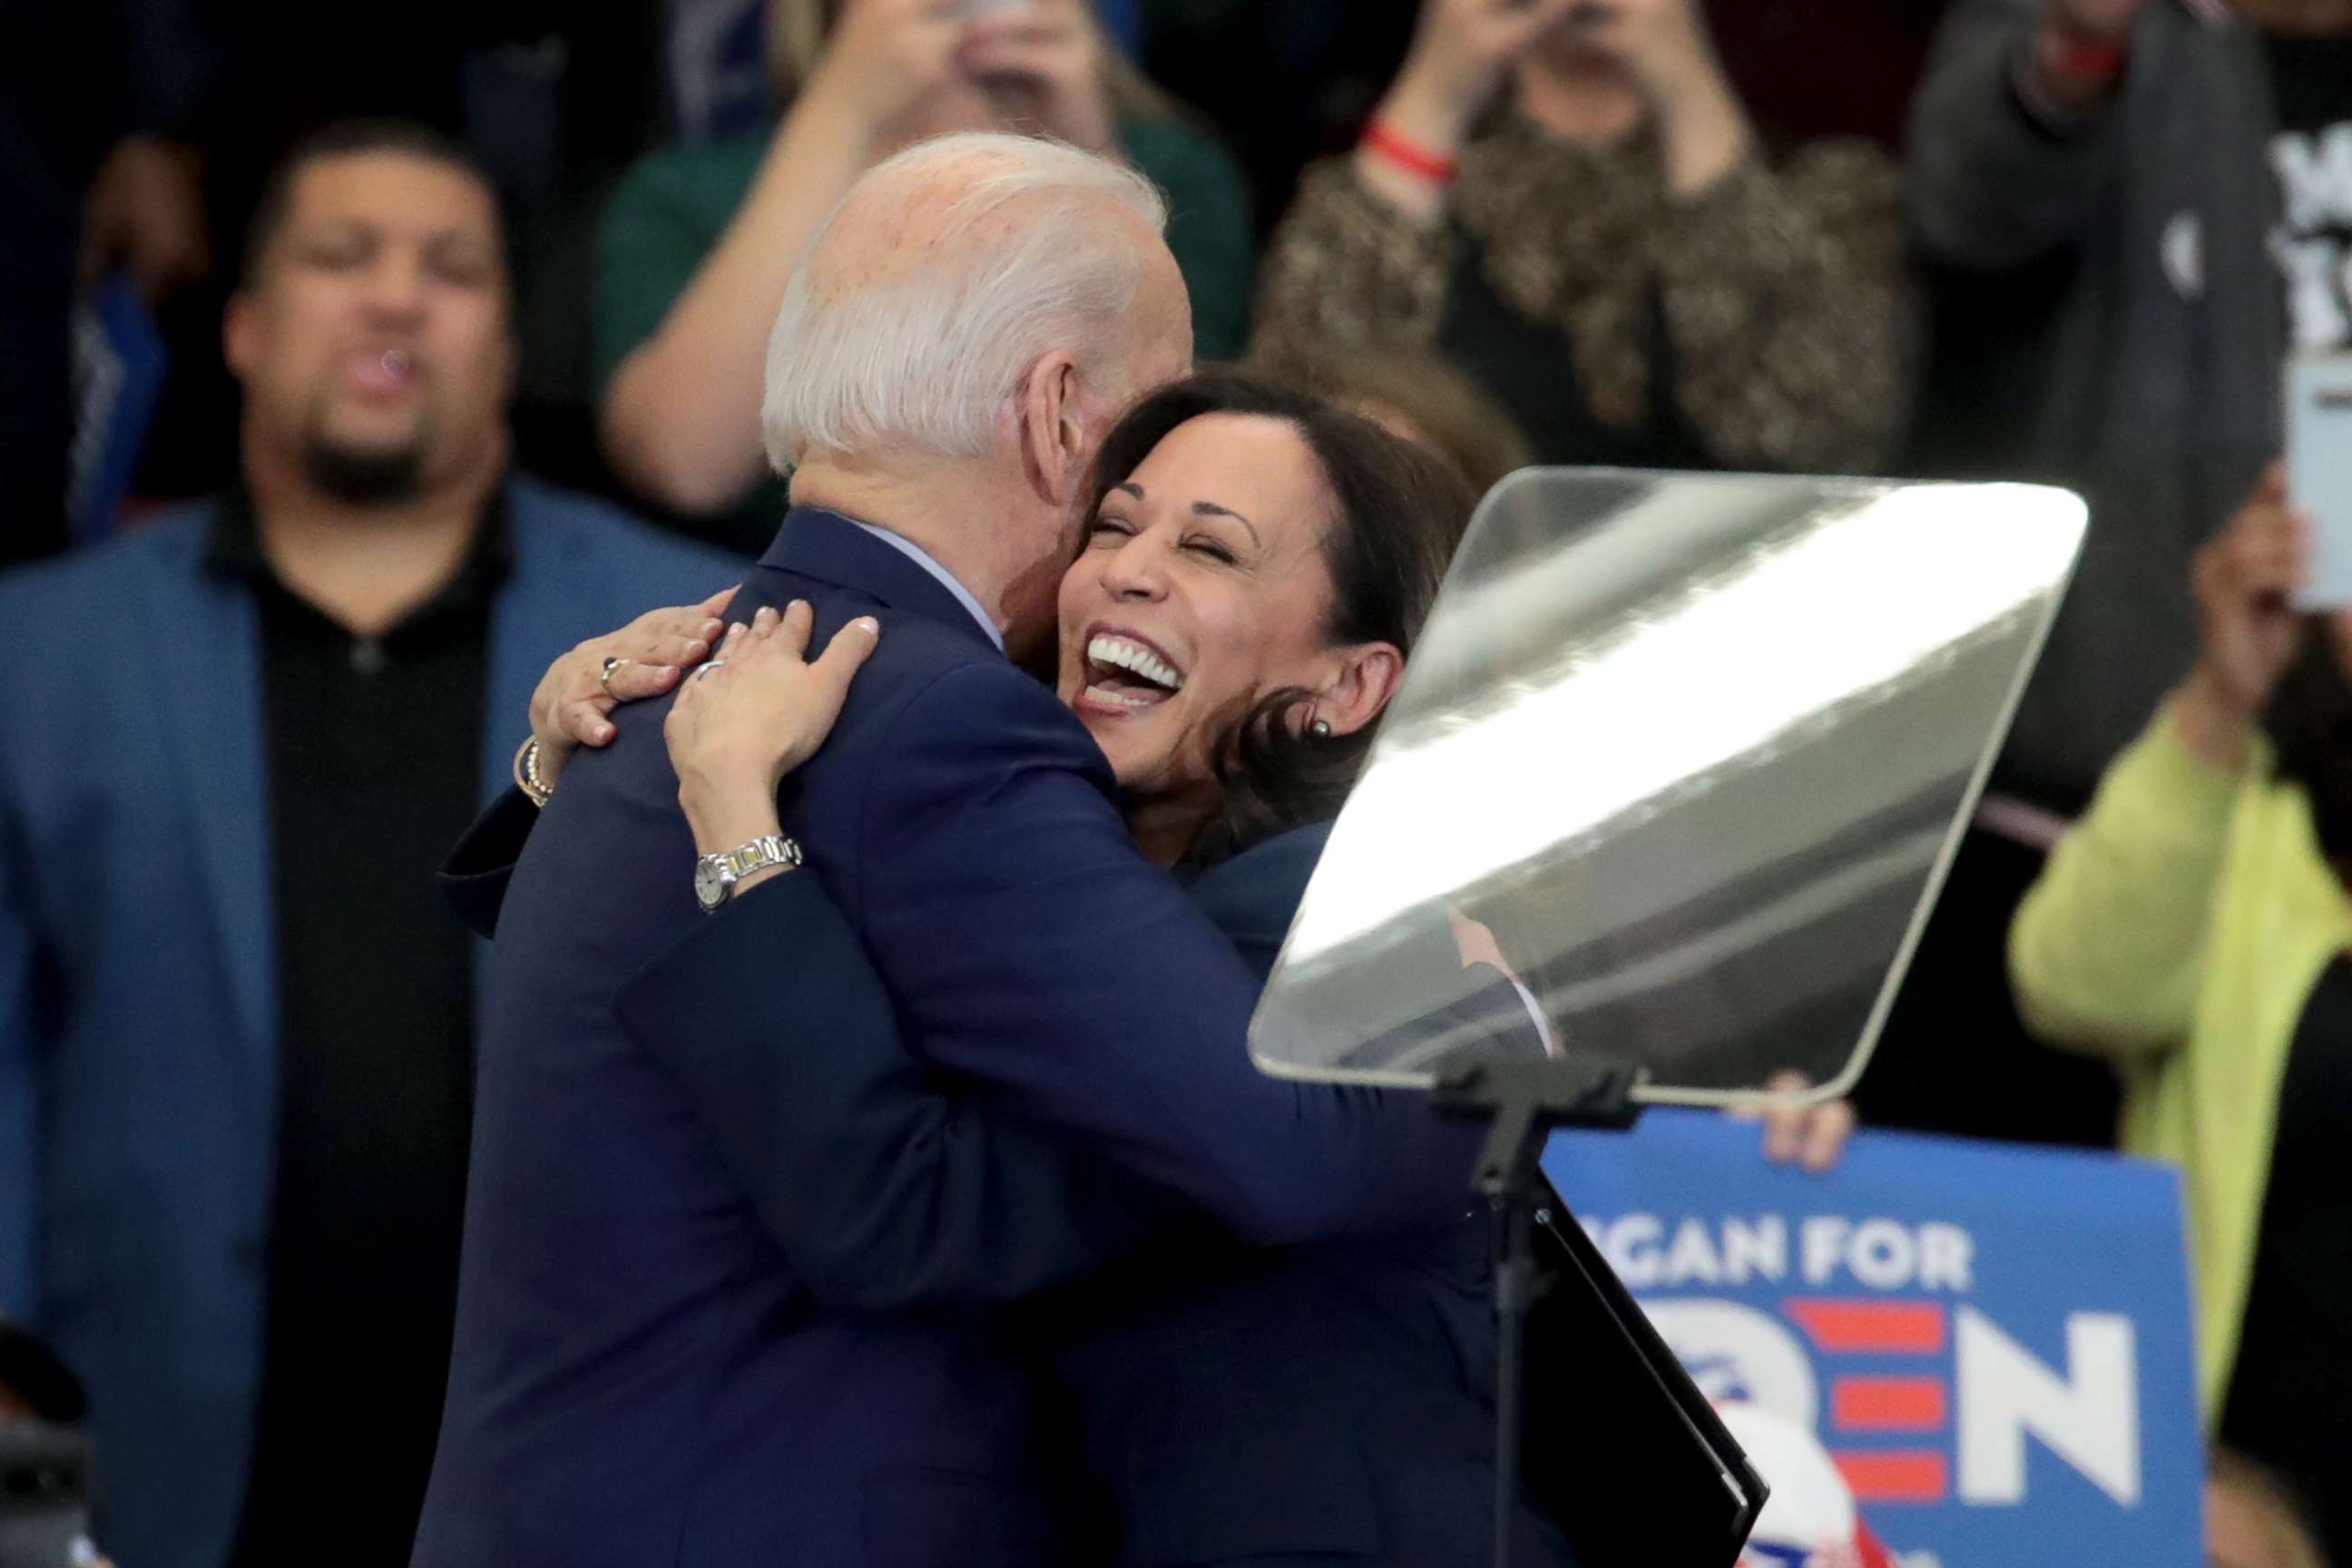 PHOTO: Sen. Kamala Harris hugs Democratic presidential candidate former Vice President Joe Biden after introducing him at a campaign rally at Renaissance High School on March 09, 2020 in Detroit.